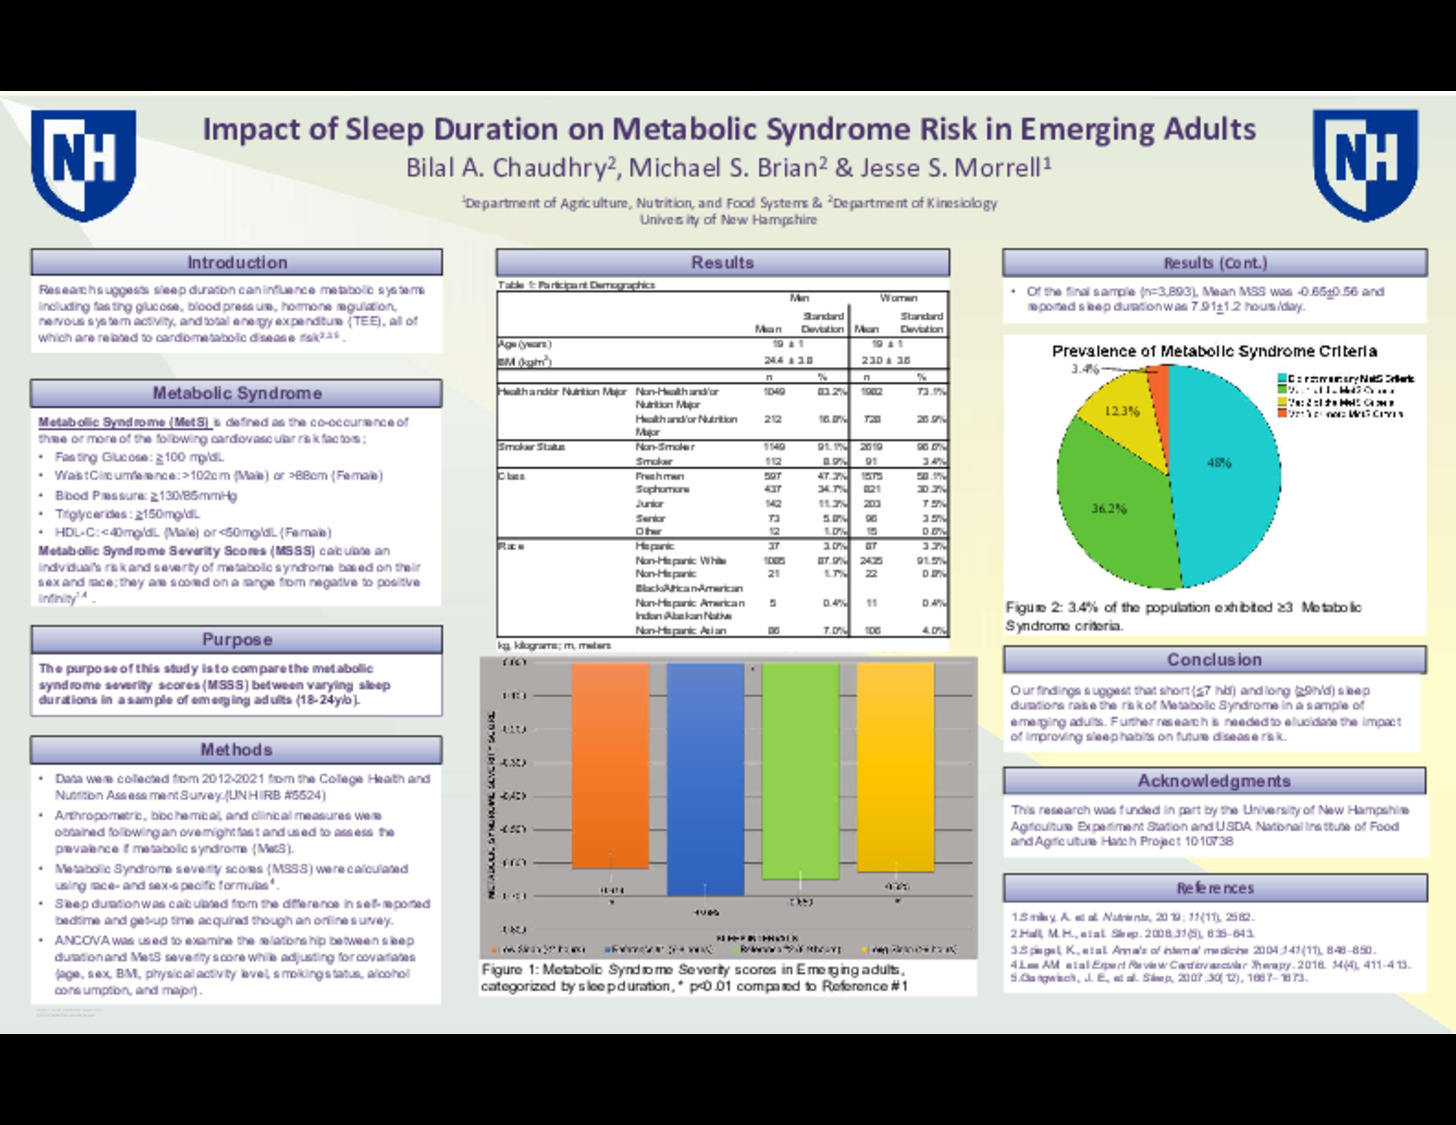 Impact Of Sleep Duration On Metabolic Syndrome Risk In Emerging Adults by bac1105